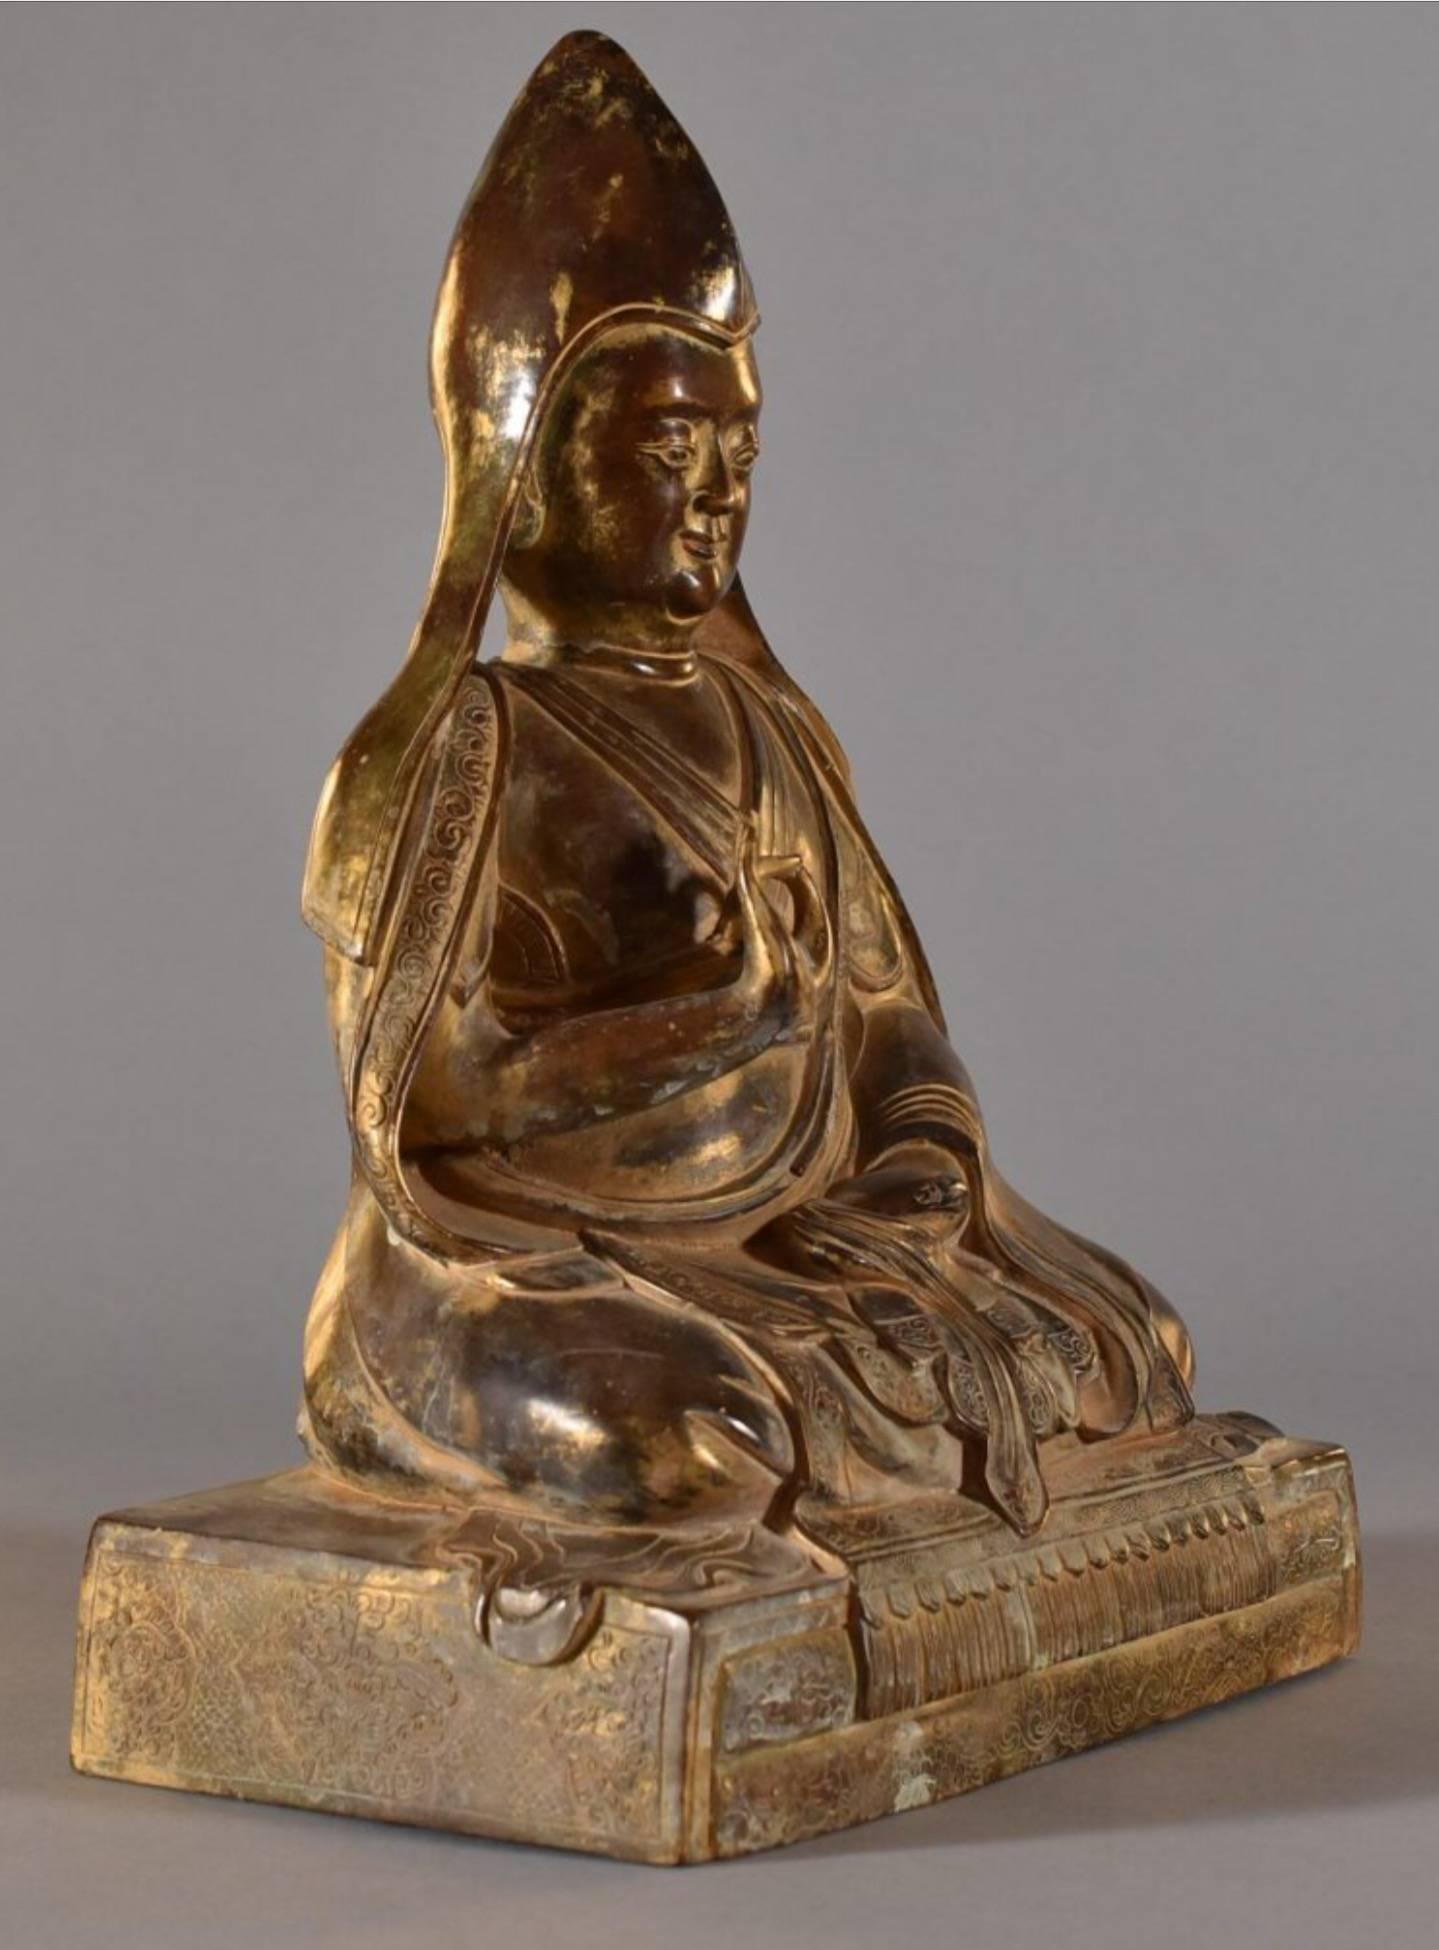 A Sino-Tibetan gilt bronze seated figure of a lama, Tsongkhapa, Chinese Qing dynasty, 18th century. 
The large and magnificent figure is seated on a rectangular pedestal base with legs crossed in dhyanasana, one hand held in vitarka mudra and the